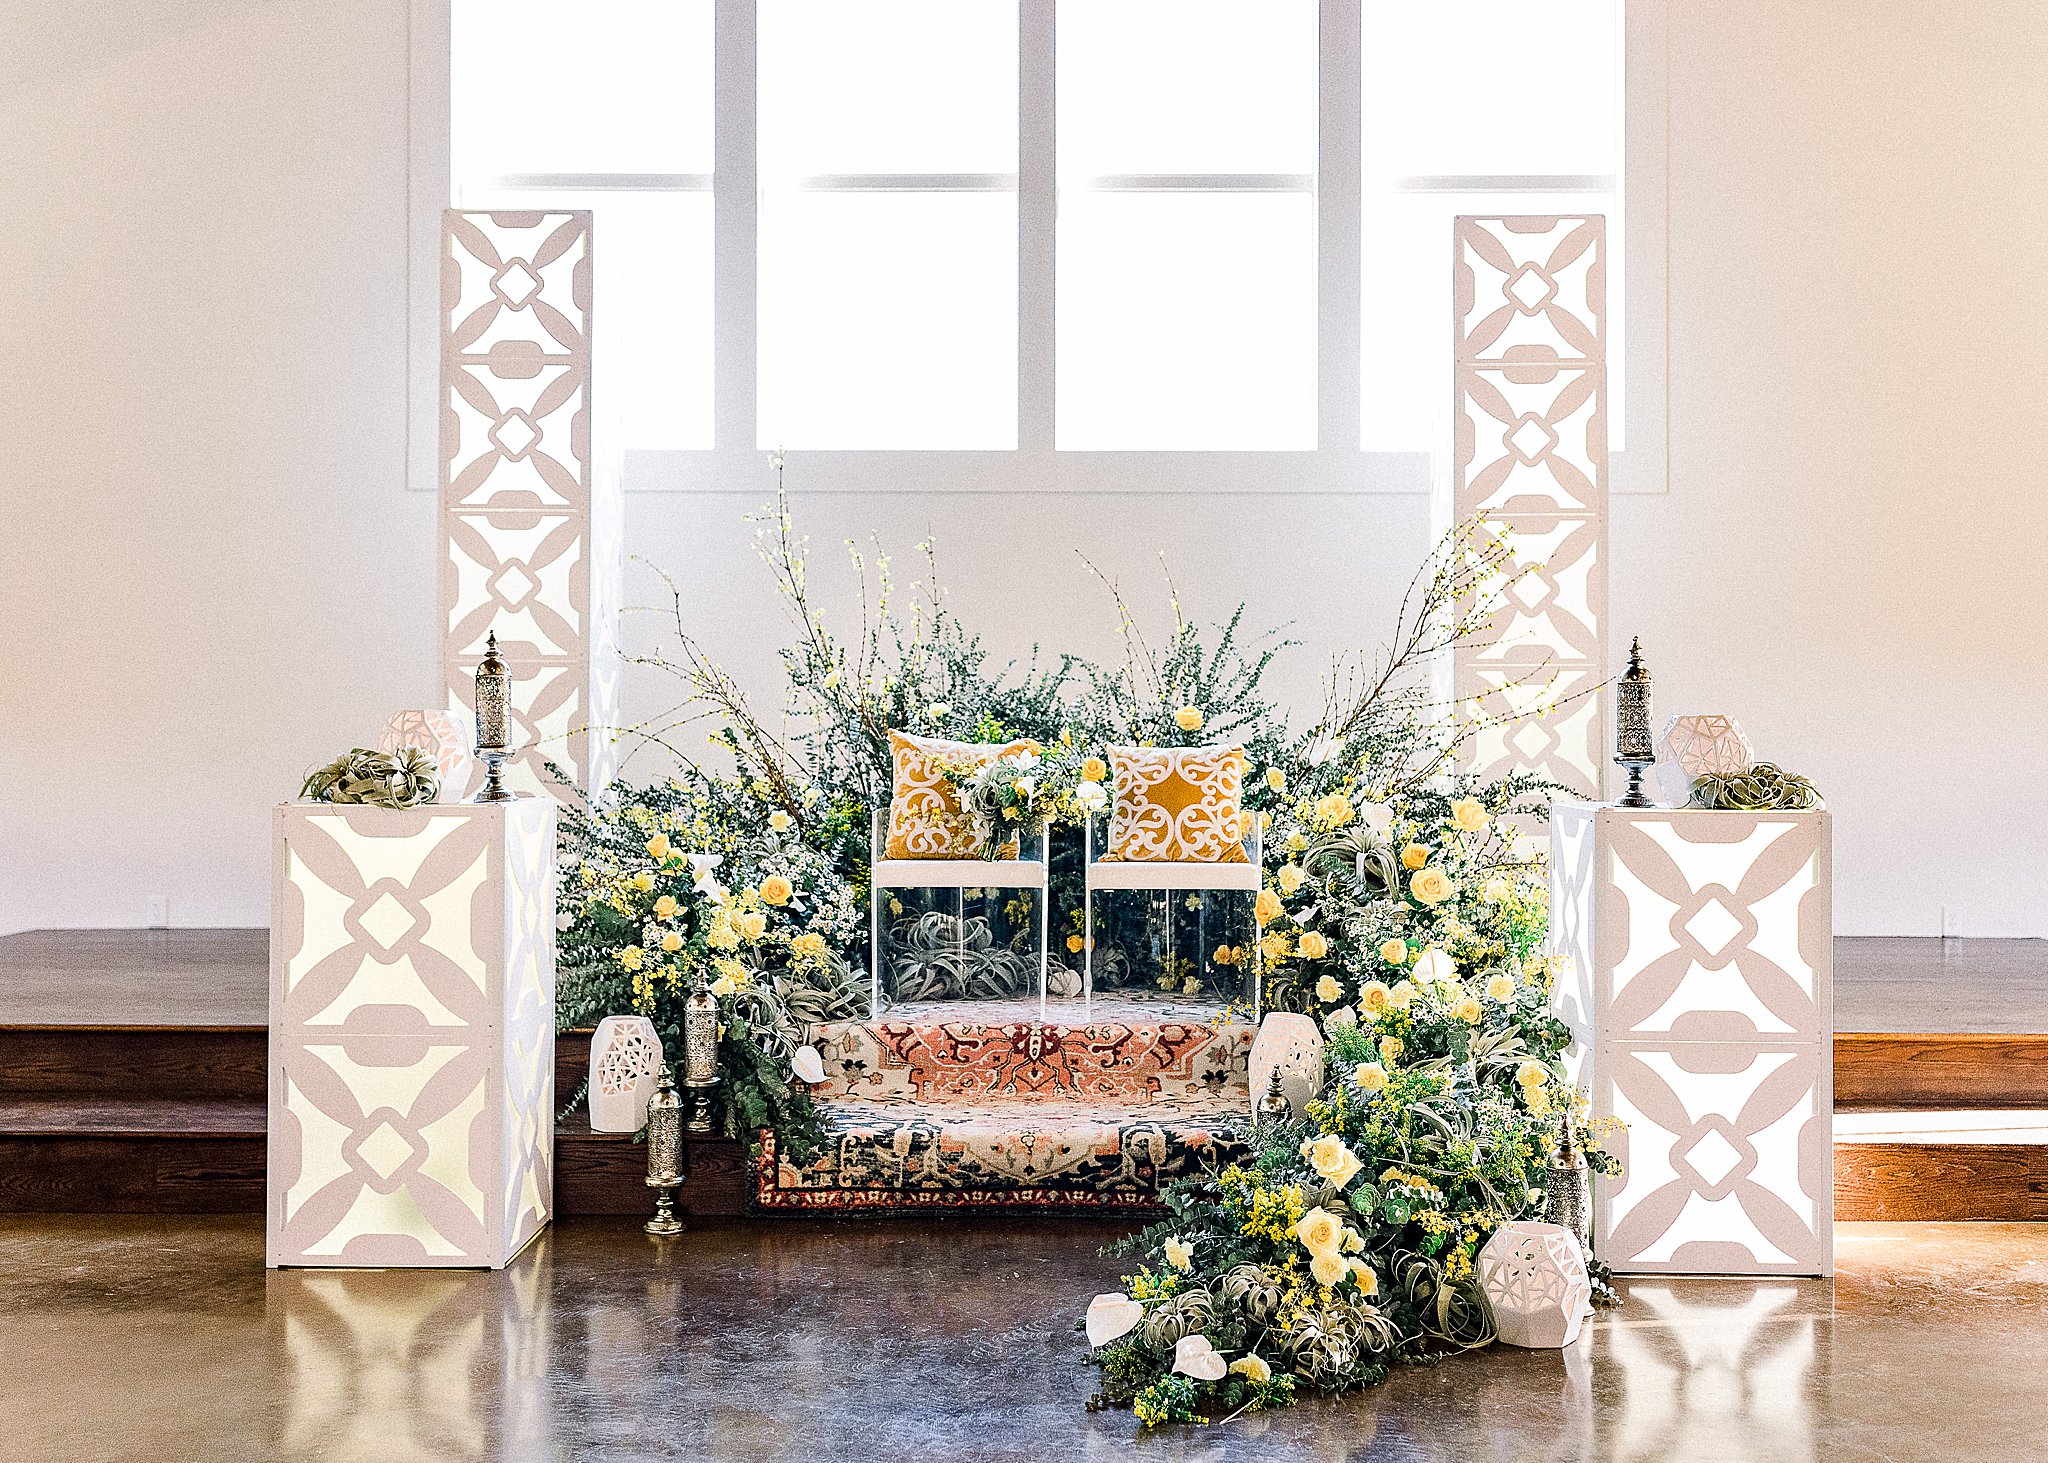 Modern Indian wedding stage and furniture